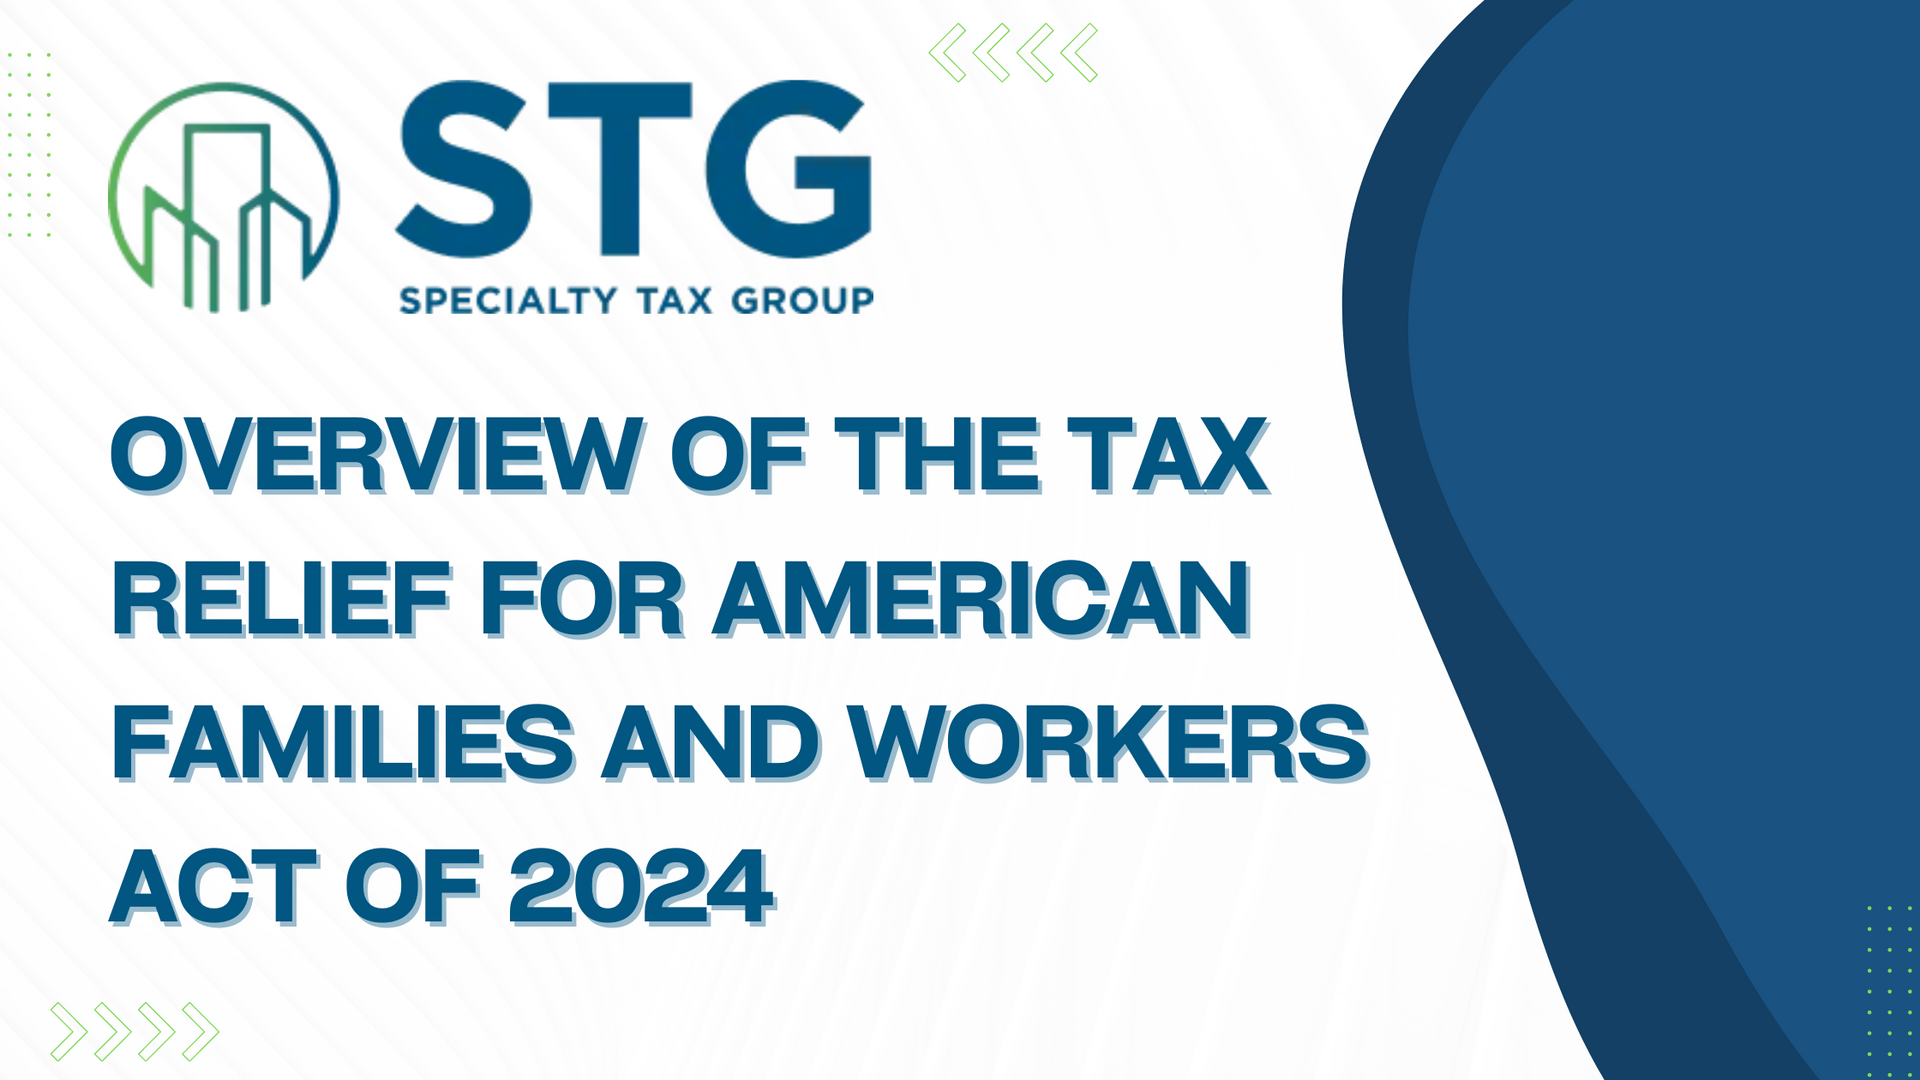 Proposed Bipartisan Tax Plan Released – Overview of the Tax Relief for American Families and Workers